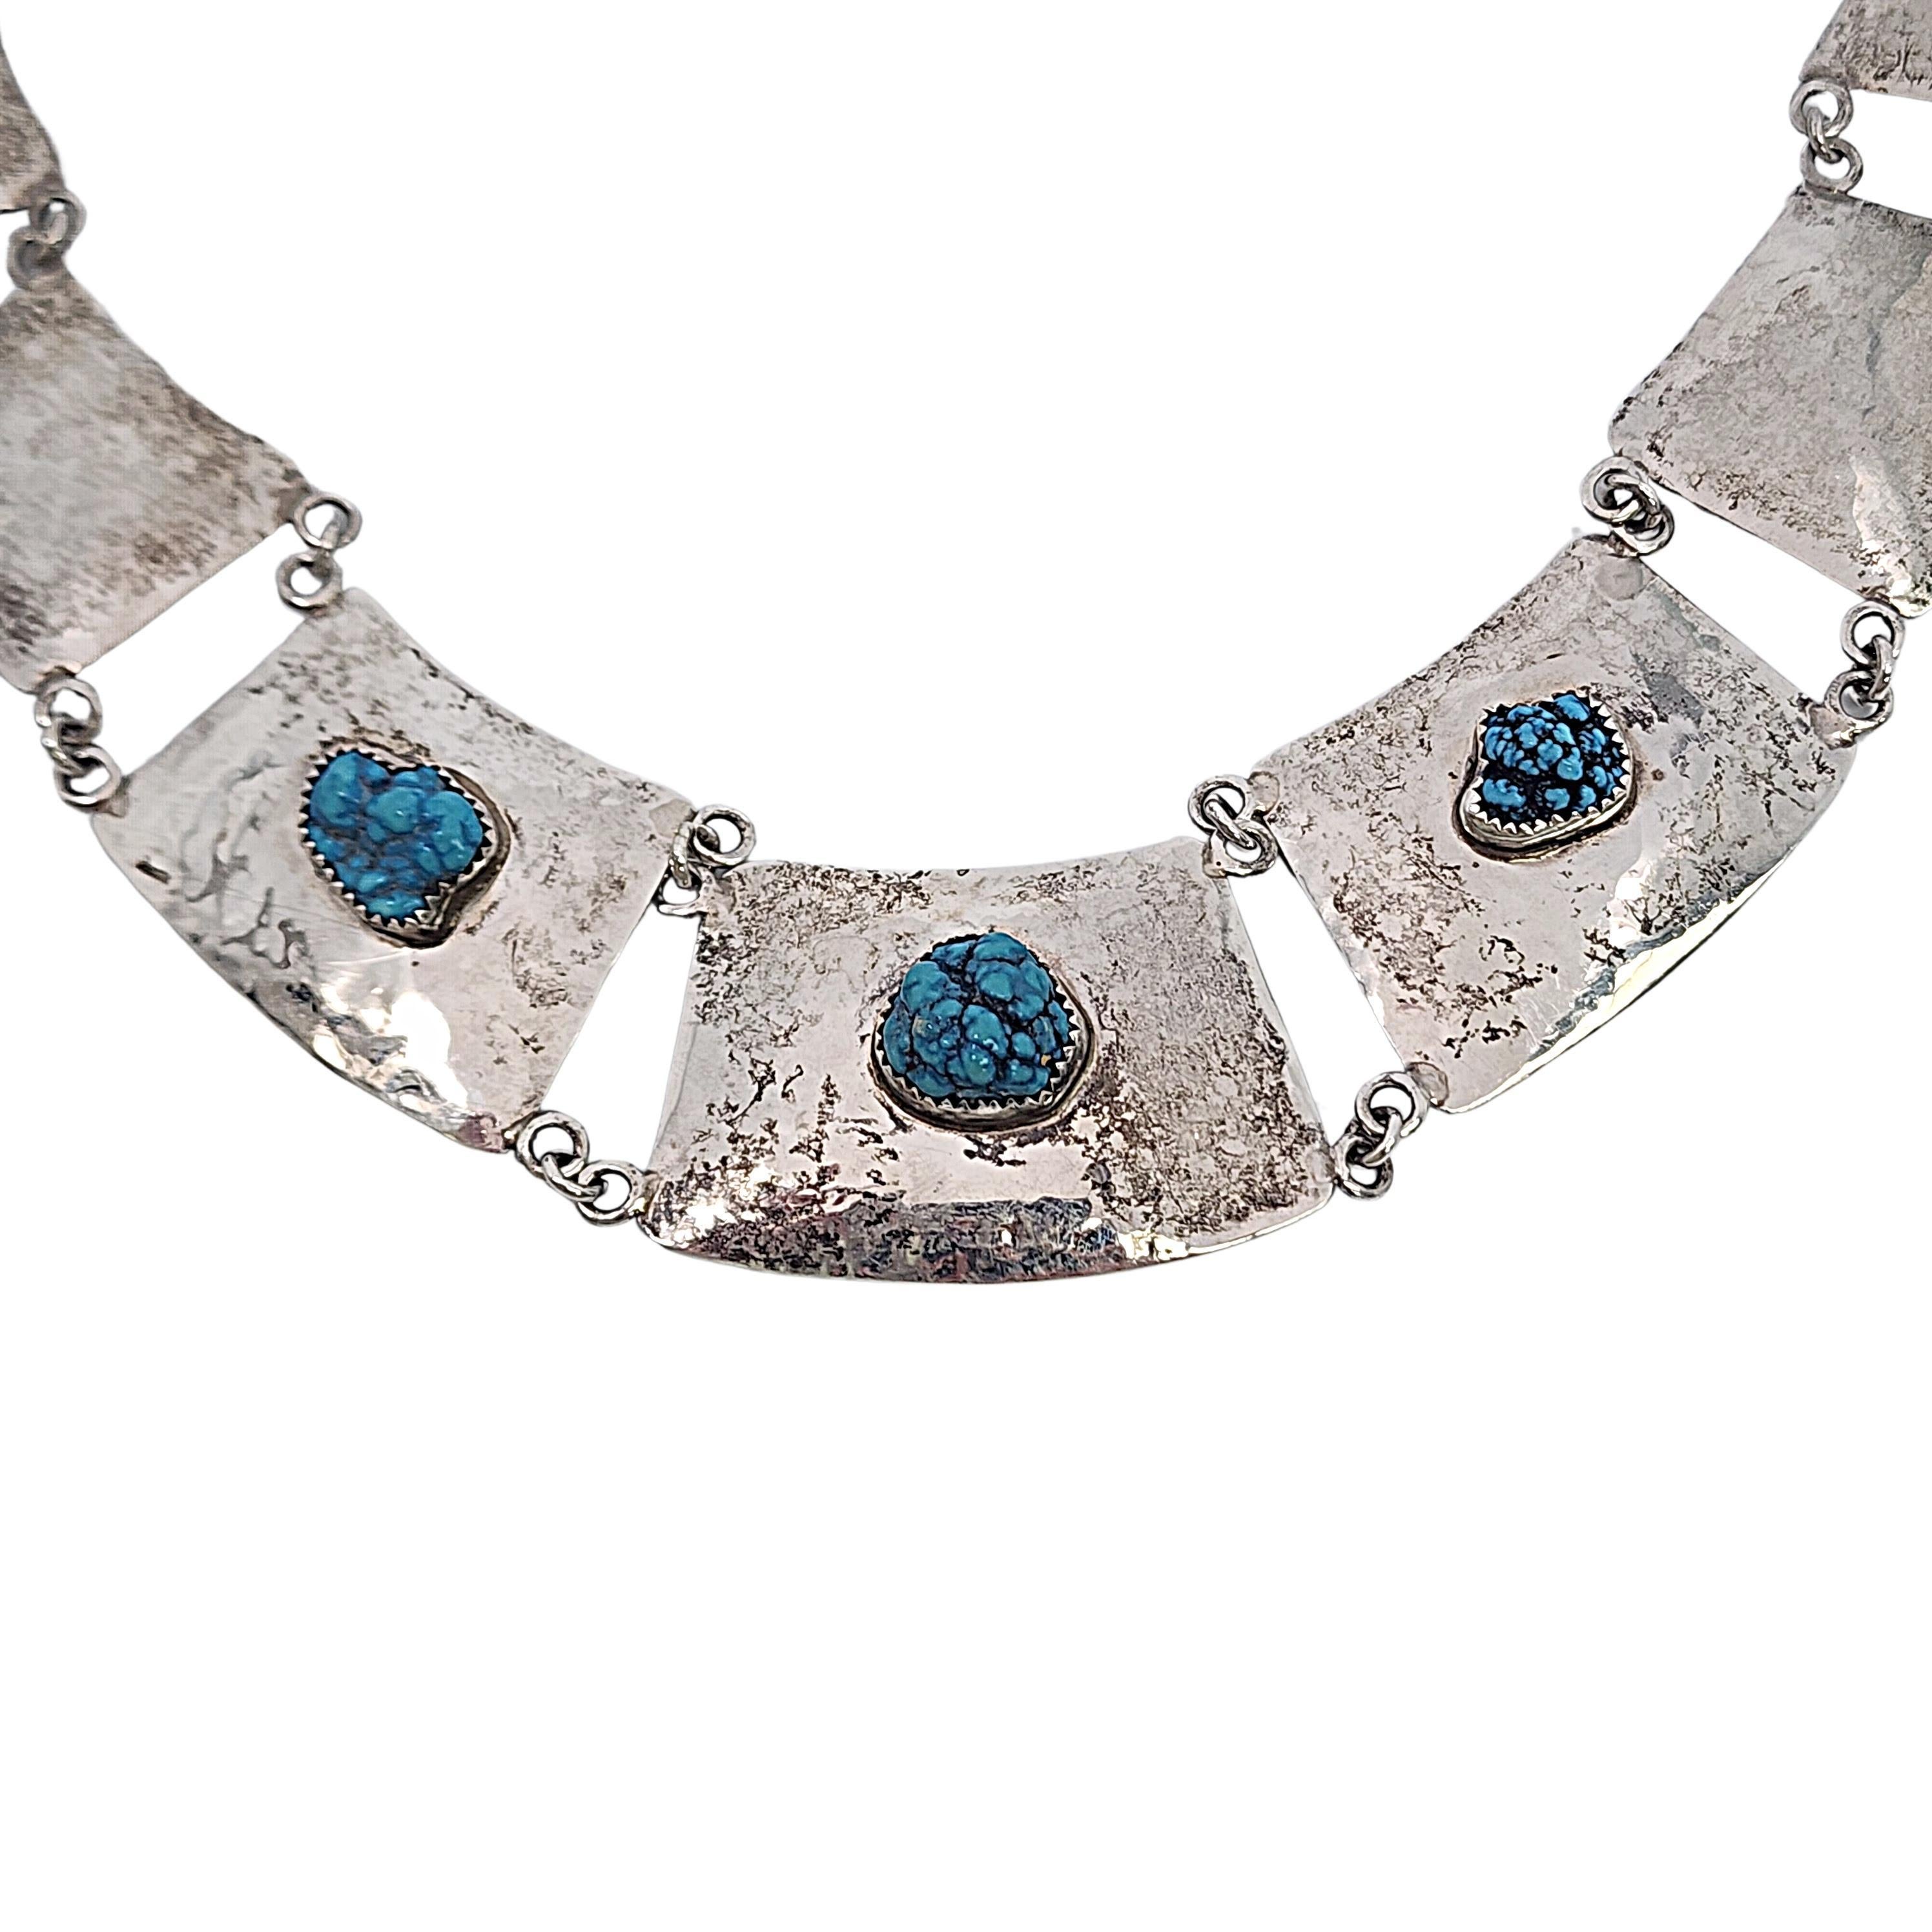 Native American Sterling Silver Turquoise Panel Necklace #17131 In Good Condition For Sale In Washington Depot, CT